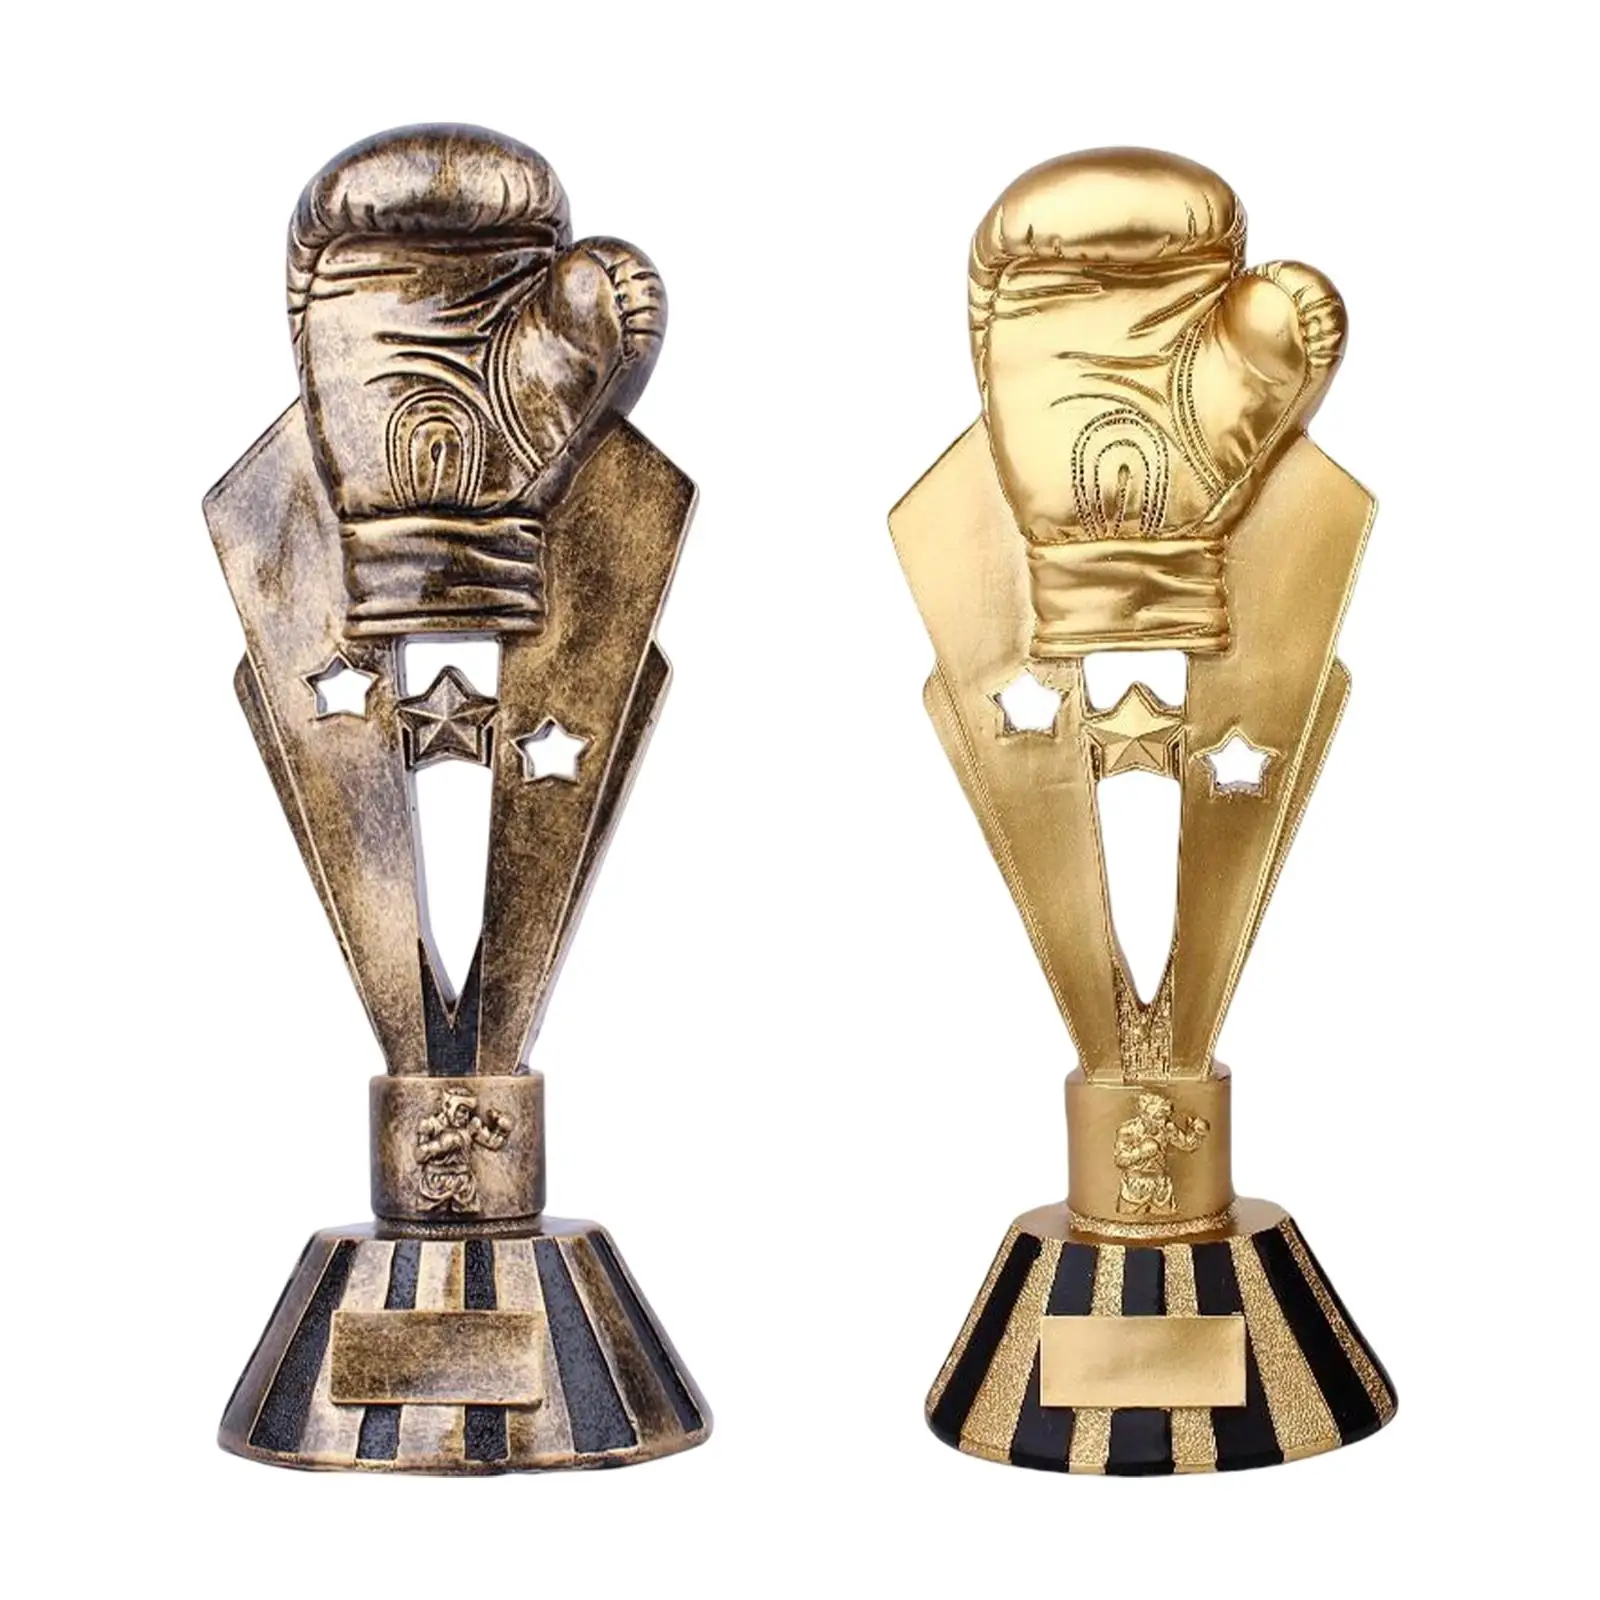 Boxing Trophies Boxing Glove Sculpture Resin Statue Figurine Art for Bedroom